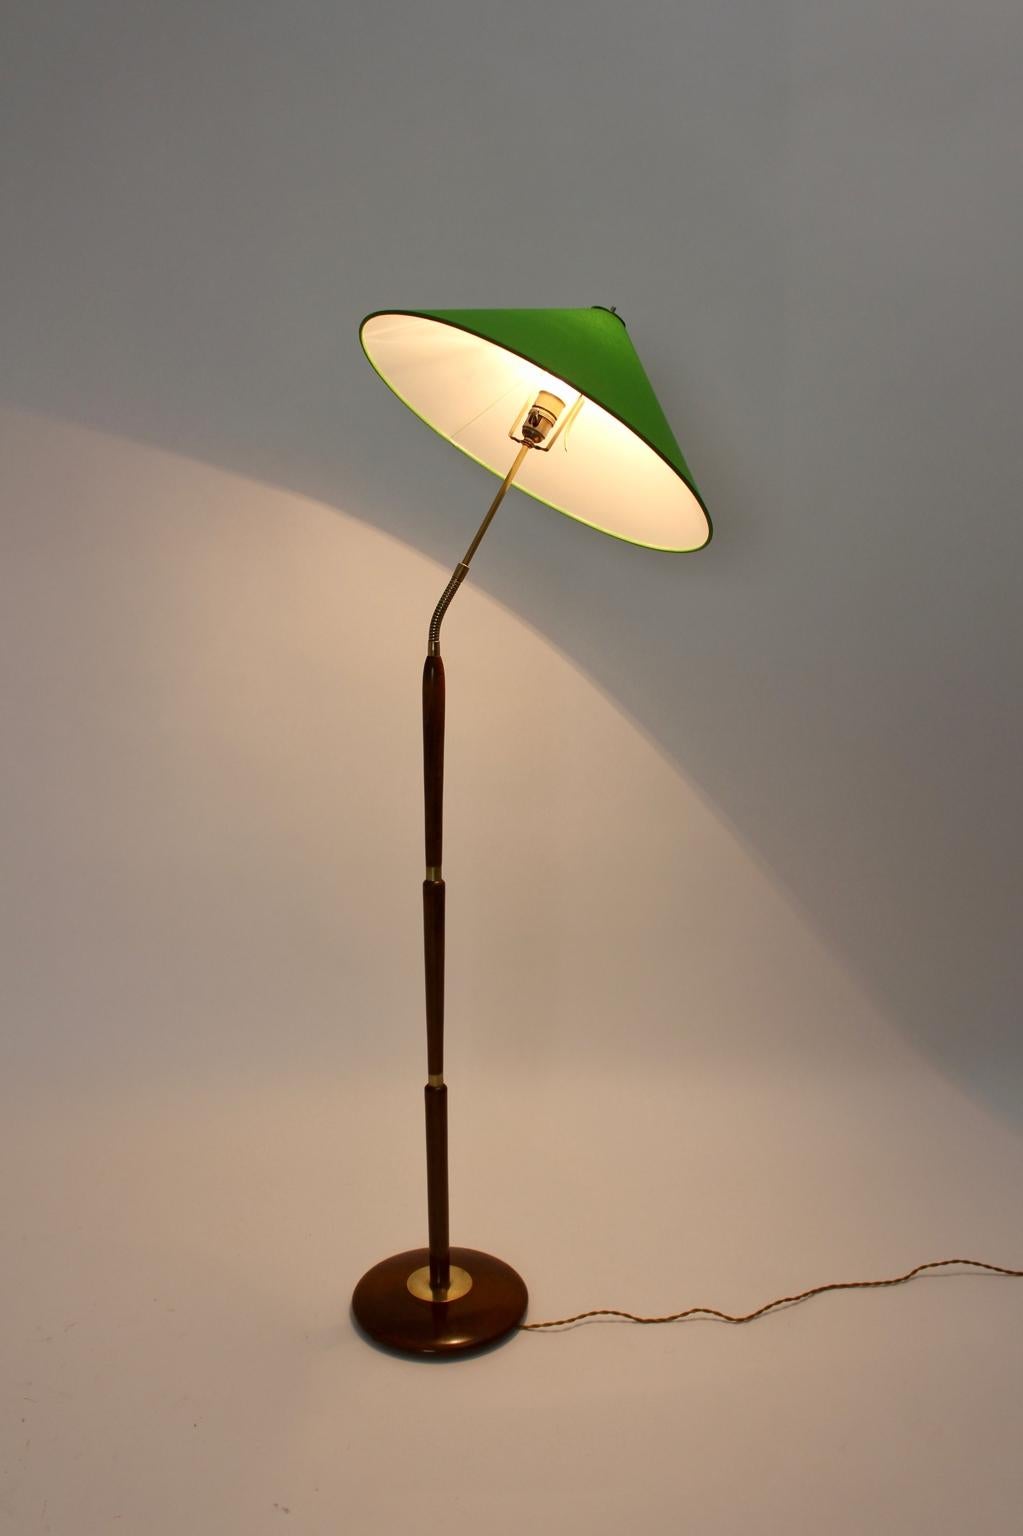 Mid century modern vintage beech brass floor lamp attributed to Giuseppe Ostuni. The design features are very similar to Giuseppe Ostuni.
The renewed lampshade in playful apple green tone is adjustable and the stem features a flexible tube. So it is